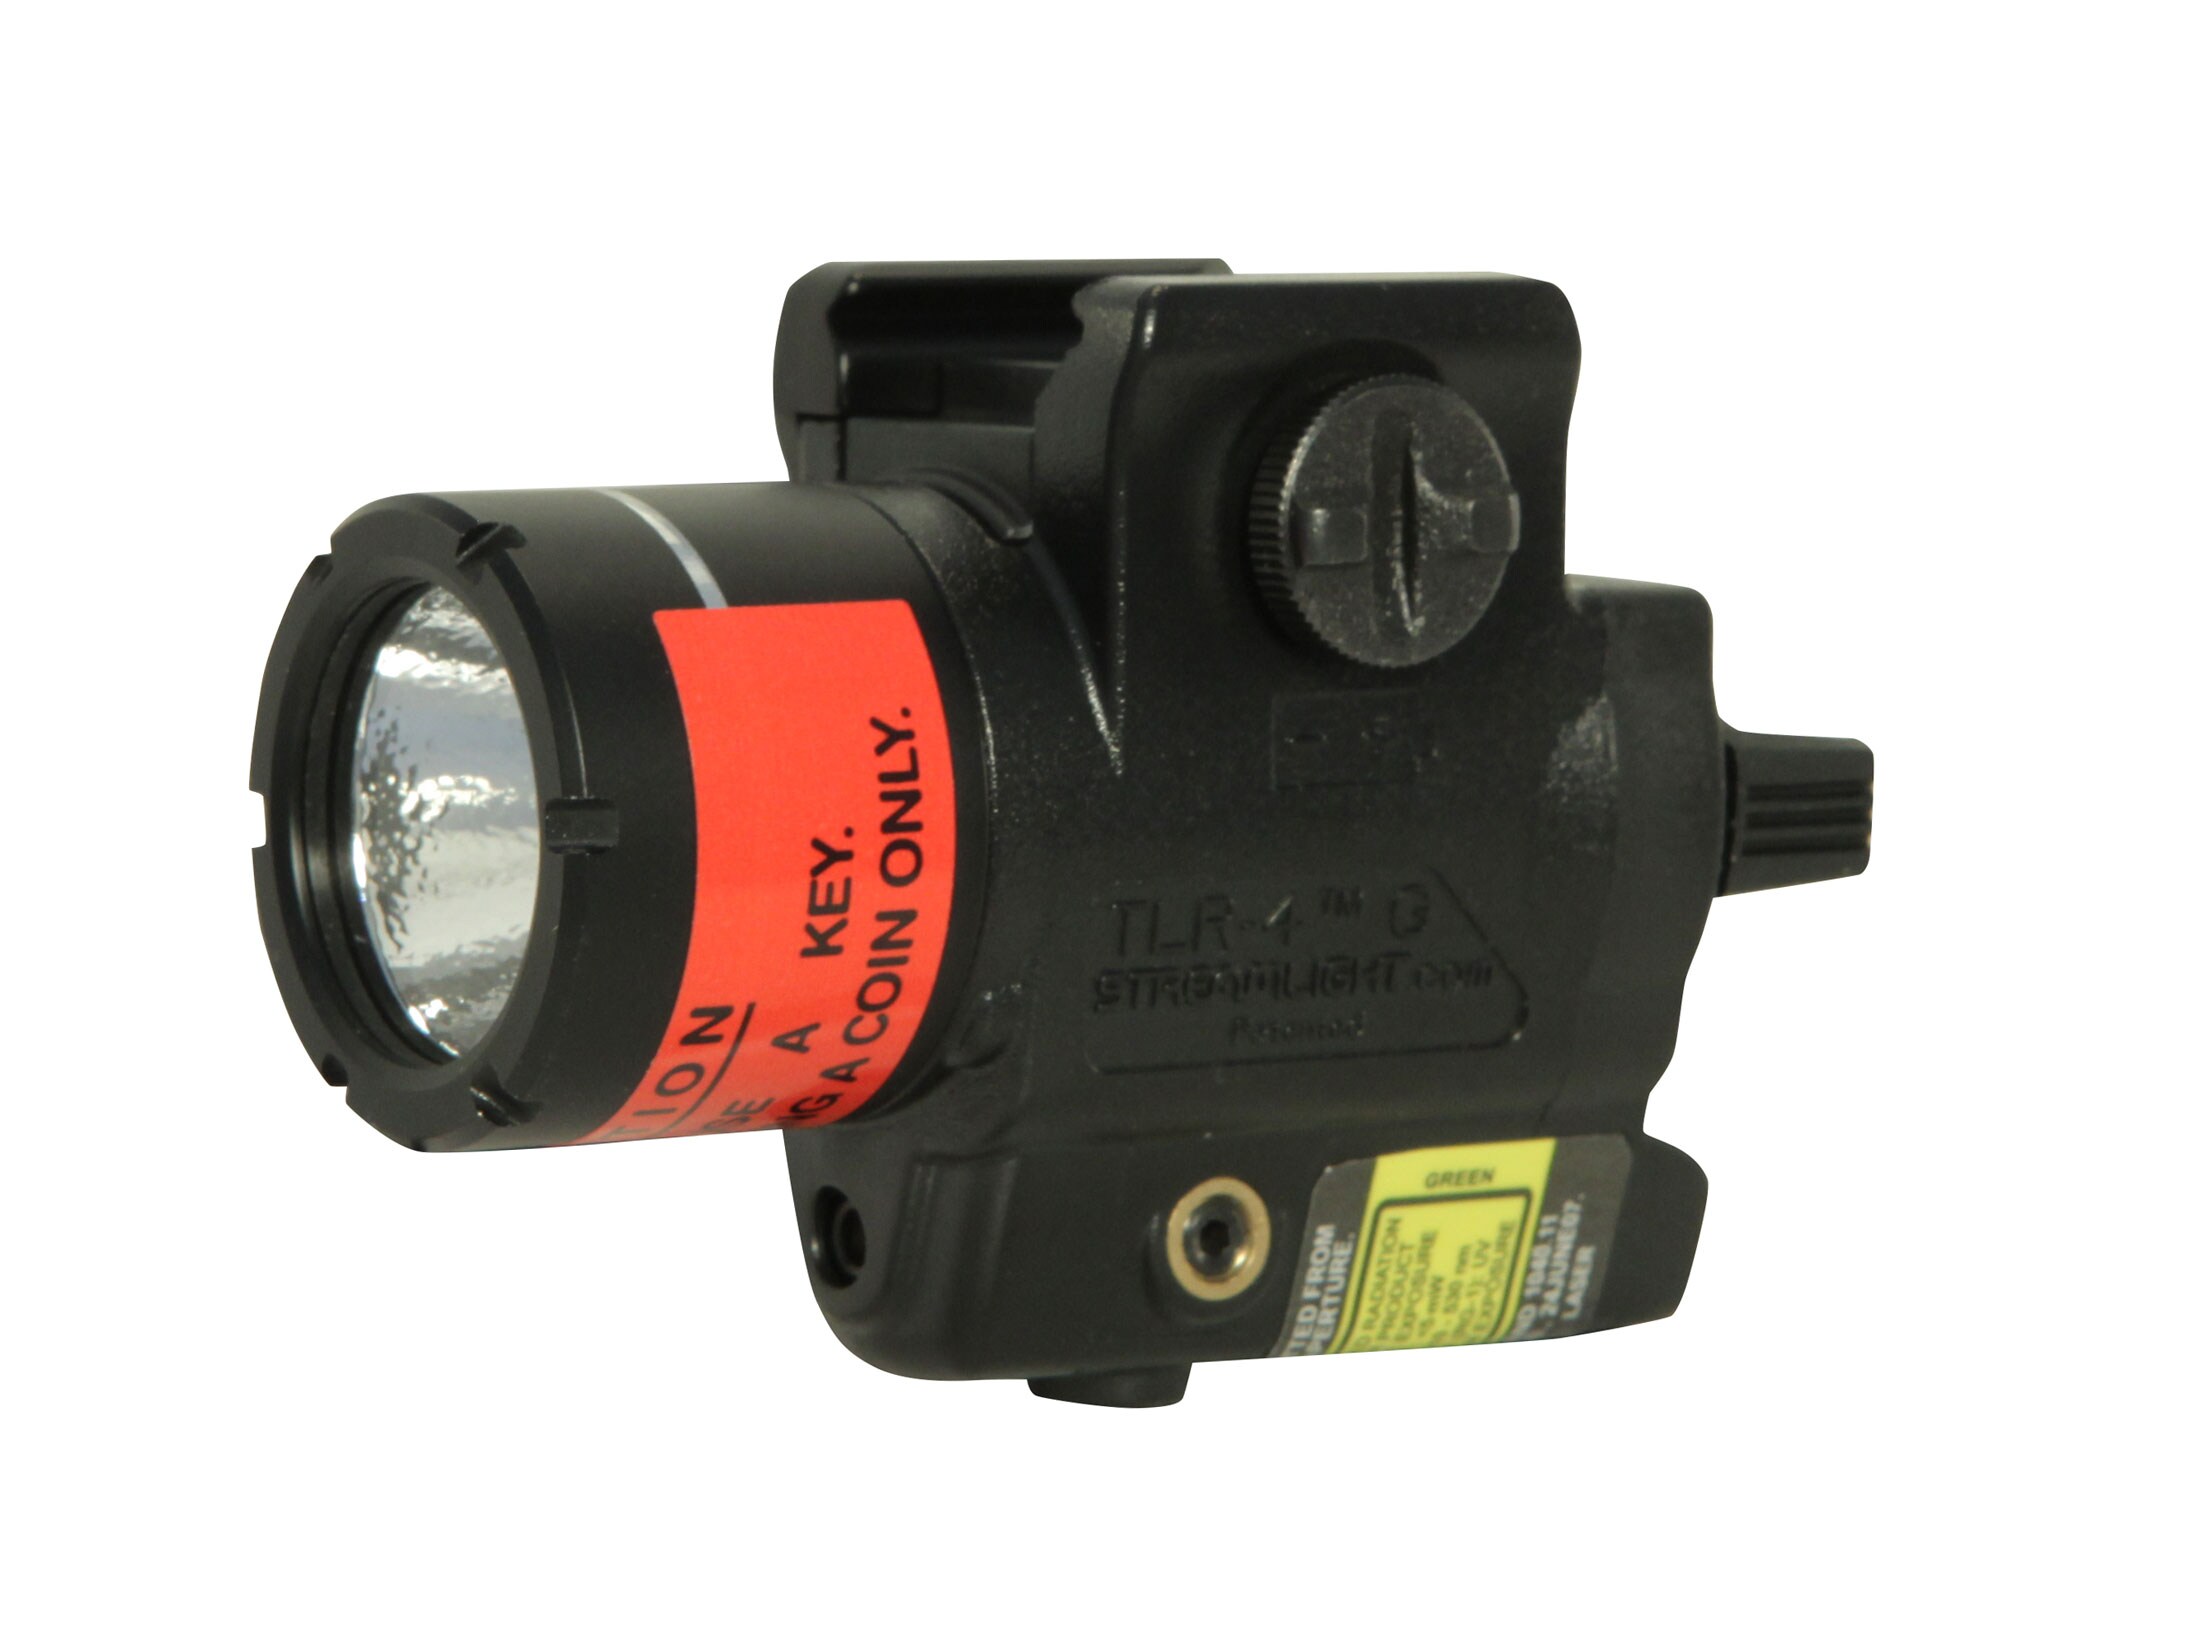 Streamlight TLR-4 Compact Weaponlight LED and Laser with 1 CR2 Battery Polymer Matte For Sale